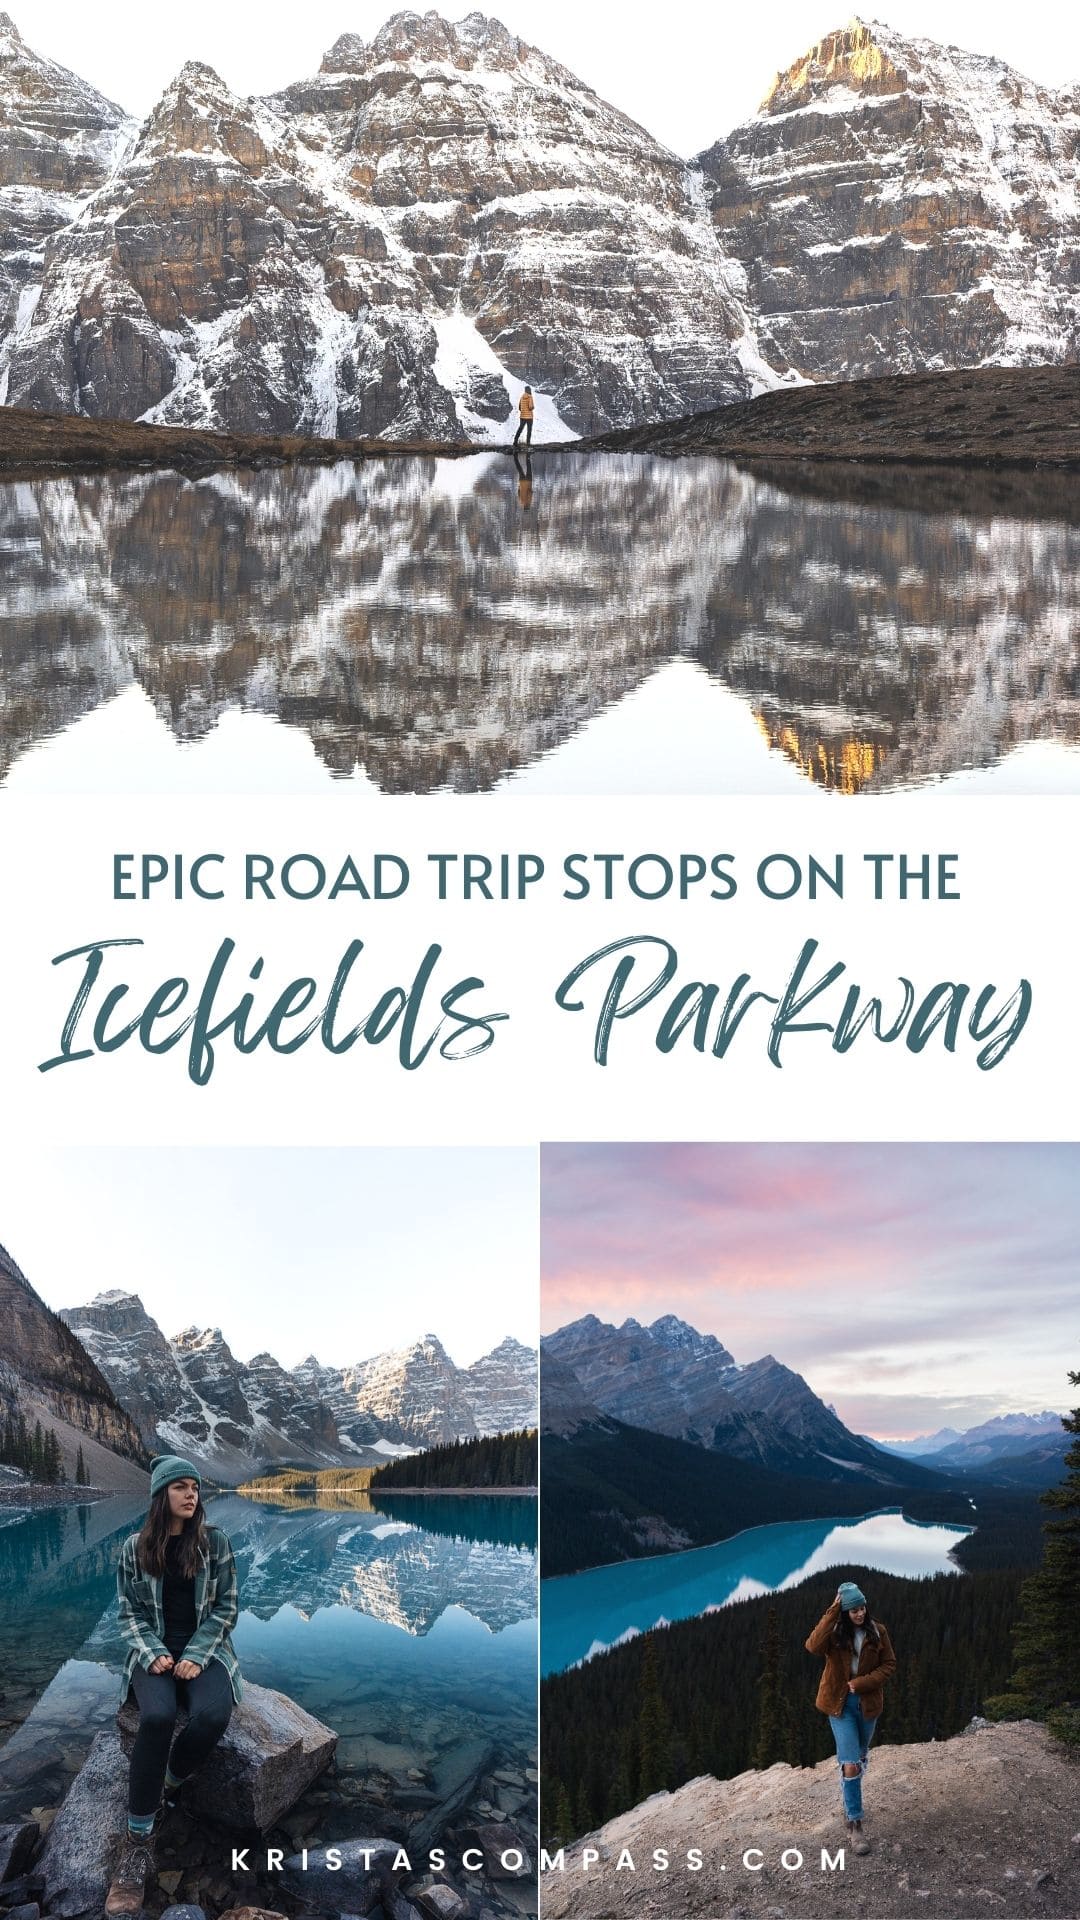 bucket list stops on the icefields parkway Canada you need to add to your canadian rockies road trip itinerary pinterest pin - icefields parkway stops